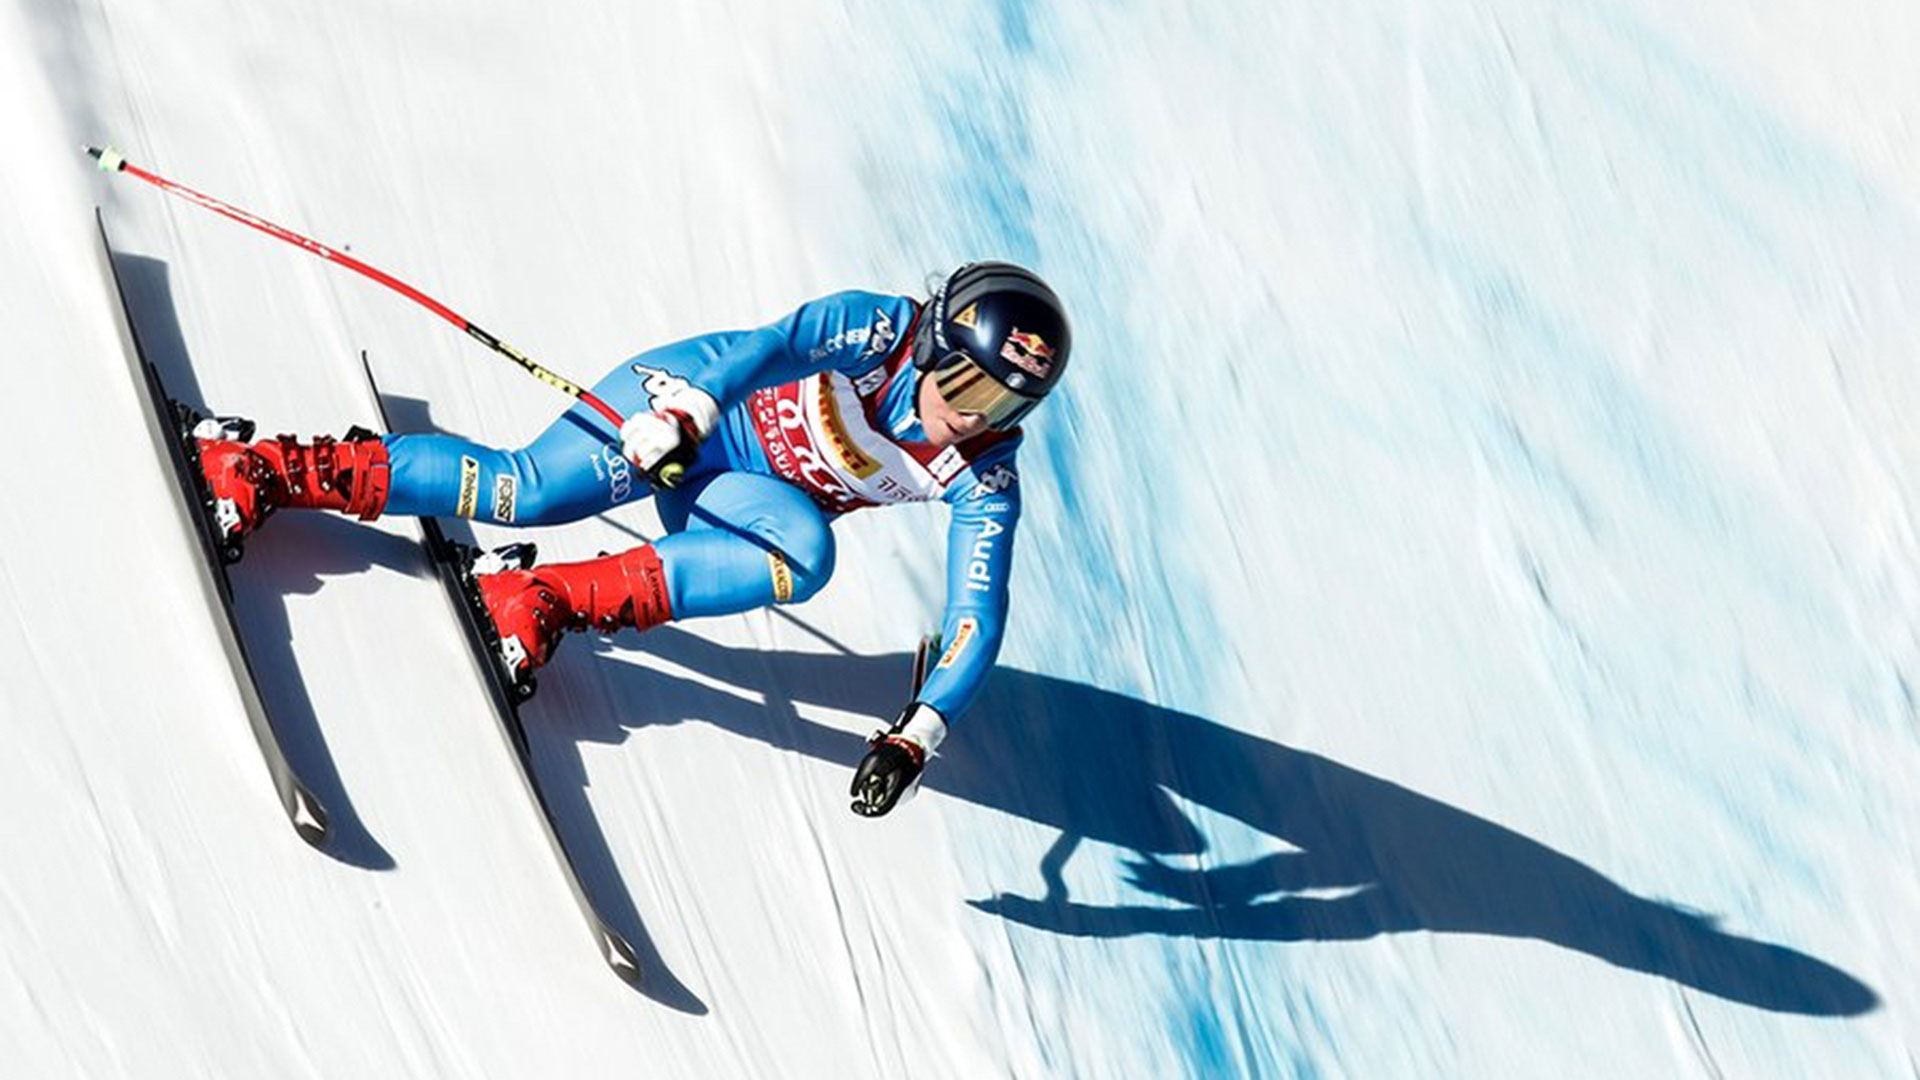 Goggia won Saturday's downhill in Cortina, before crashing in the super-G on Sunday (Pentaphoto_Cortina World Cup)